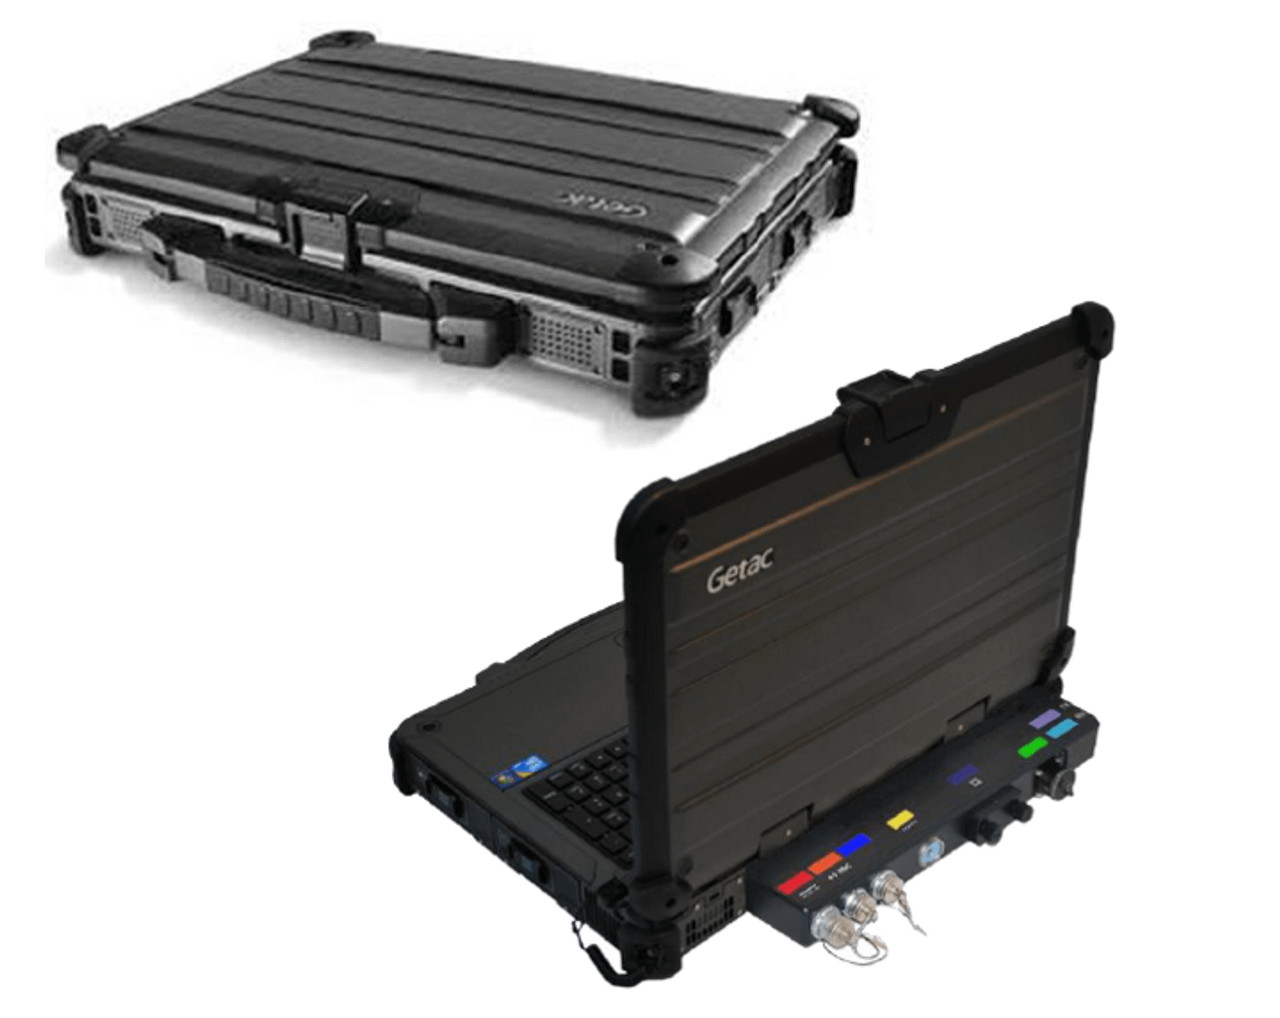 TEMPEST Mobile & Rugged Laptops